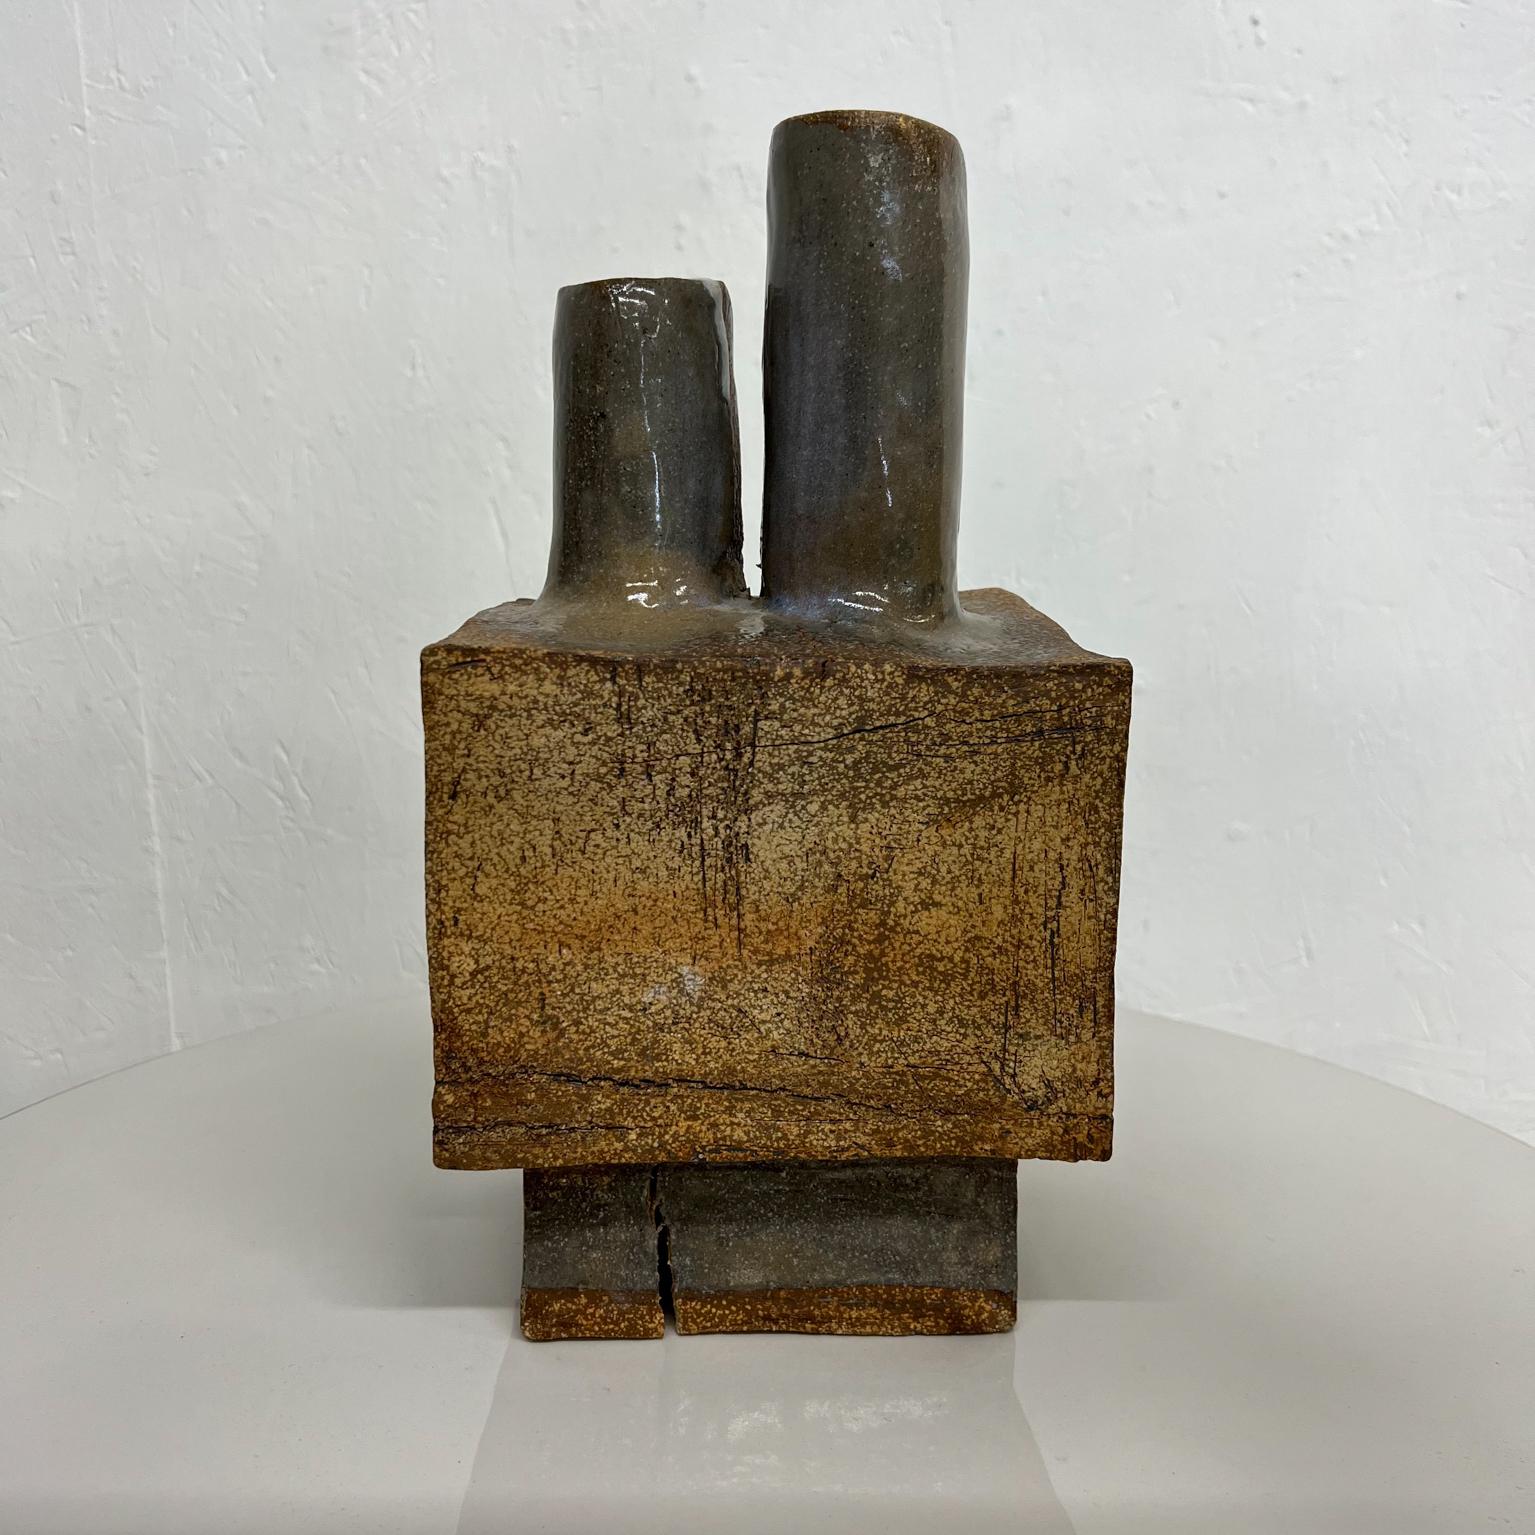 1970s MCM Pottery in brutalist style. Not perfect. With imperfections, looks like the clay fractured during heat process. Still strong and sturdy.
Bold and good looking.
No signature.
Measures: 6.88 wide x 5.38 deep x 12.75 tall
Preowned